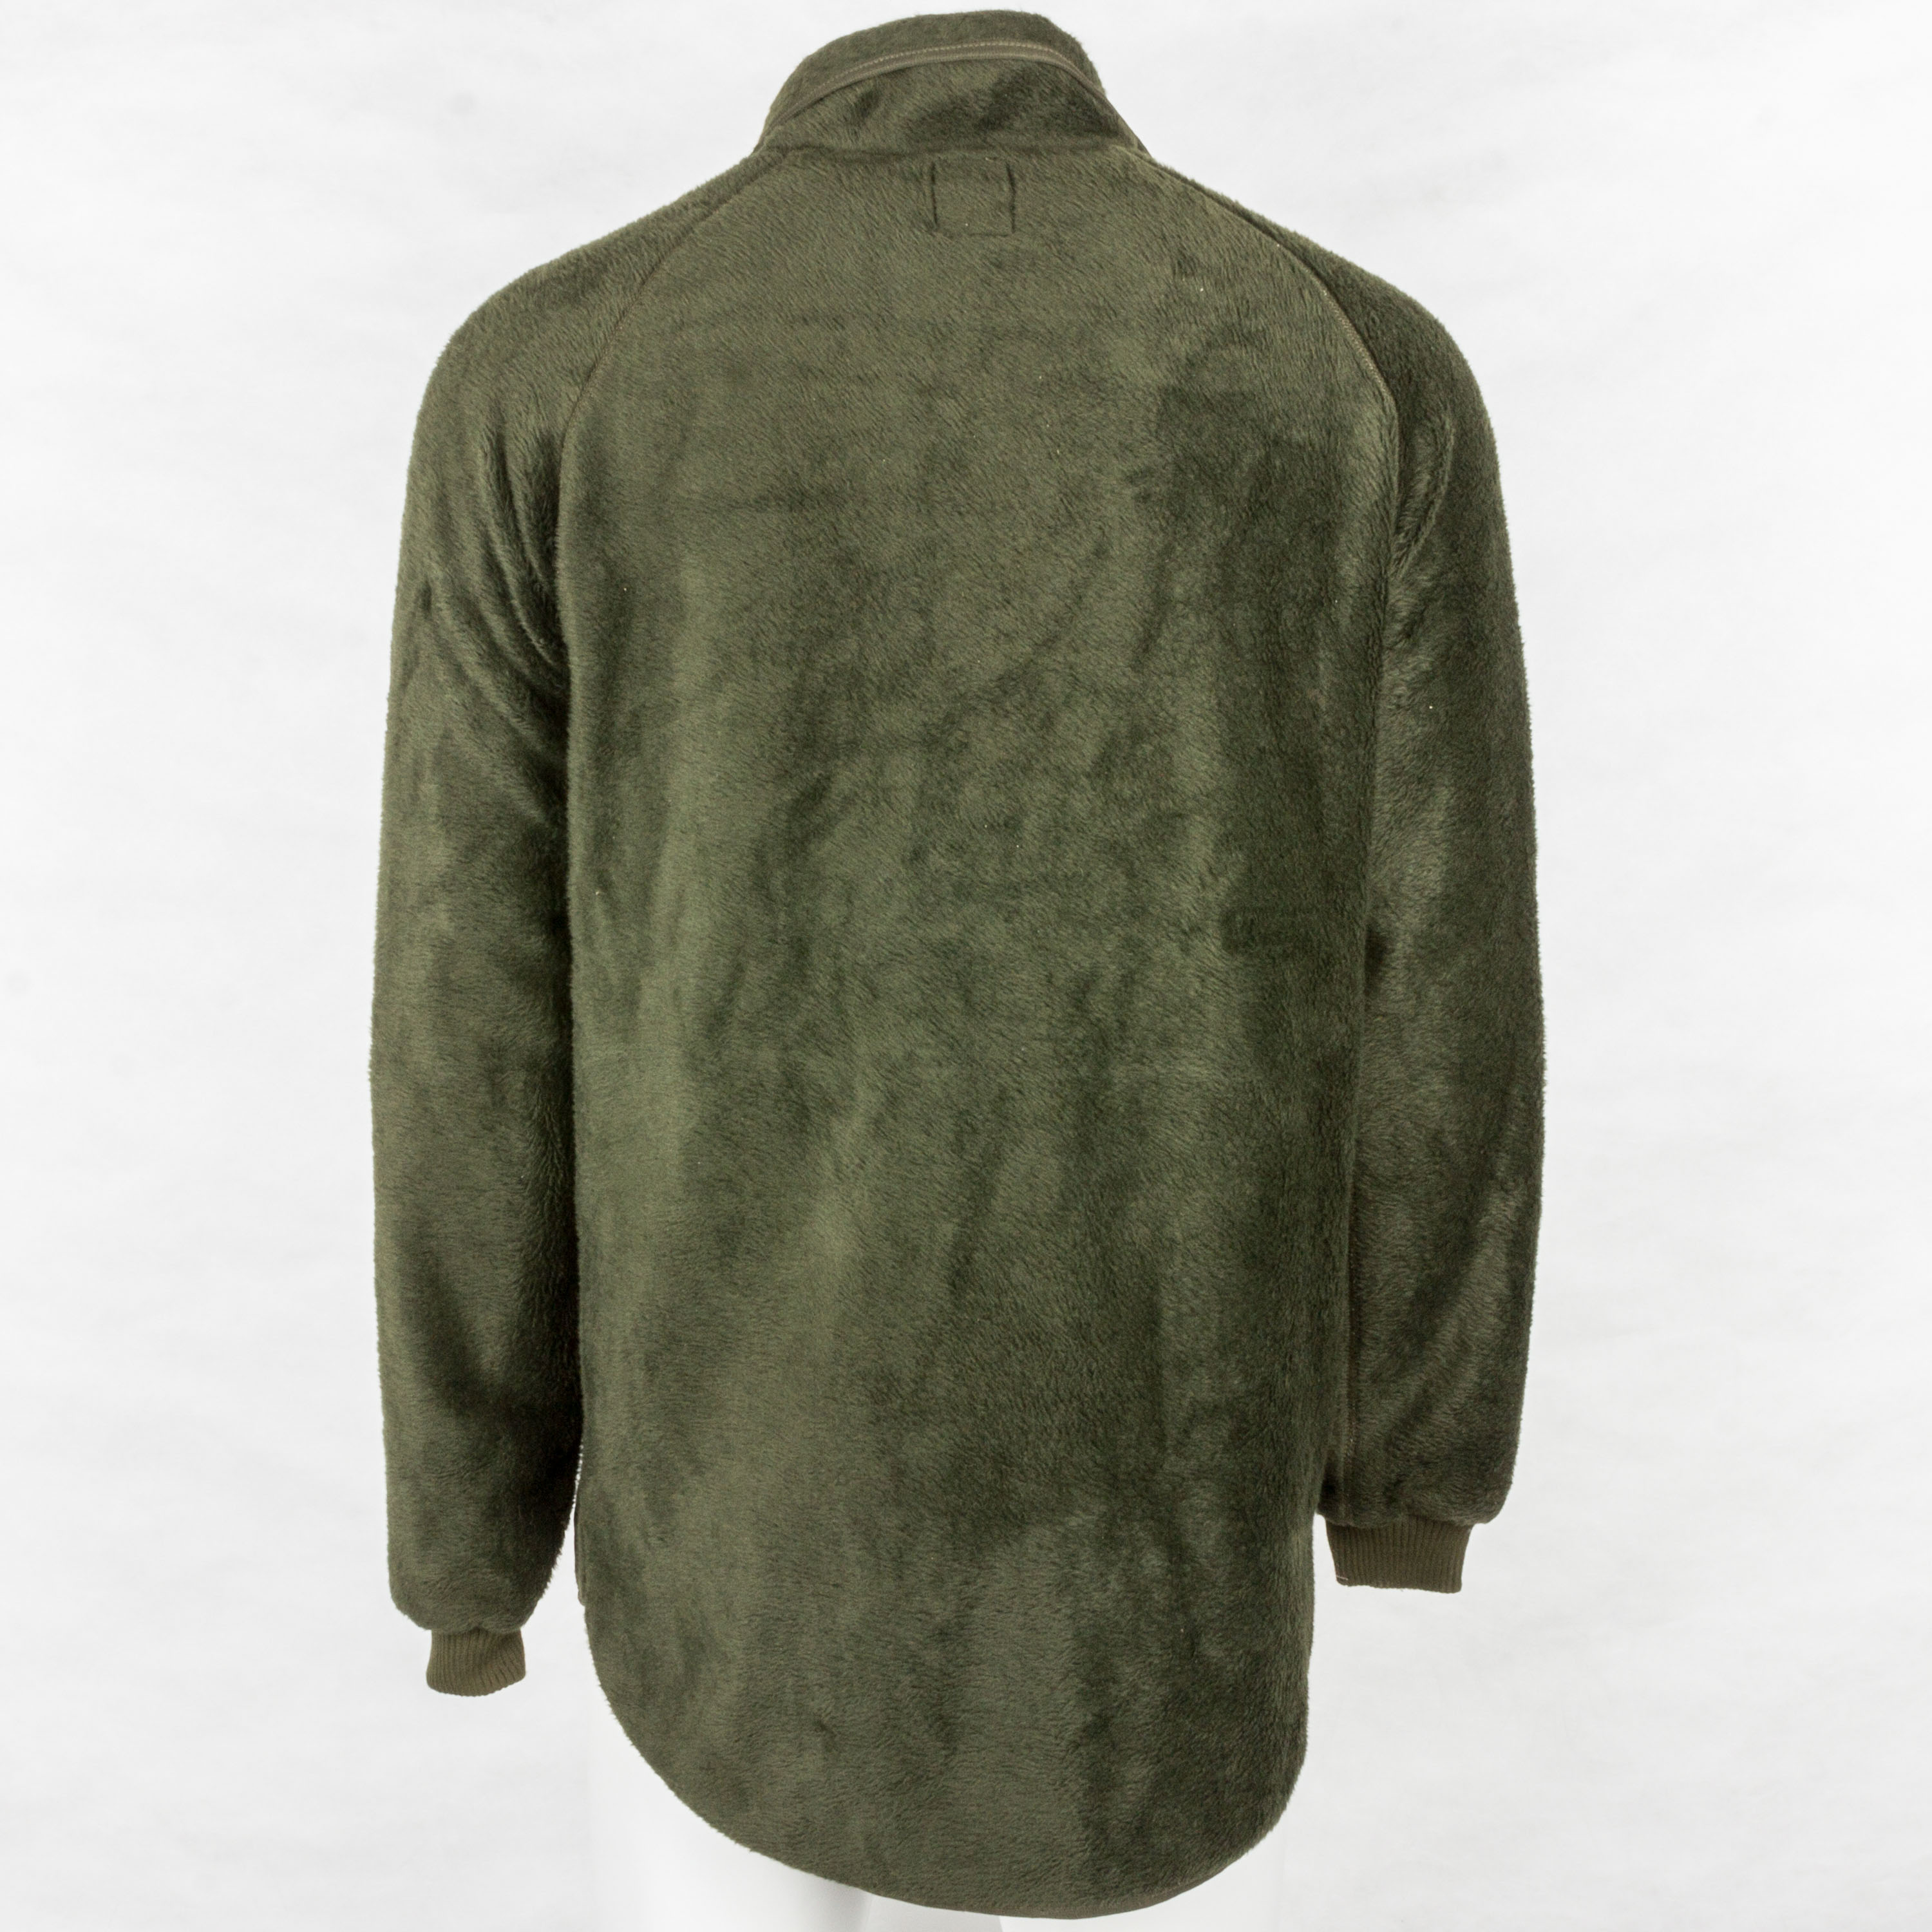 Purchase the Dutch Fleece Jacket Used by ASMC